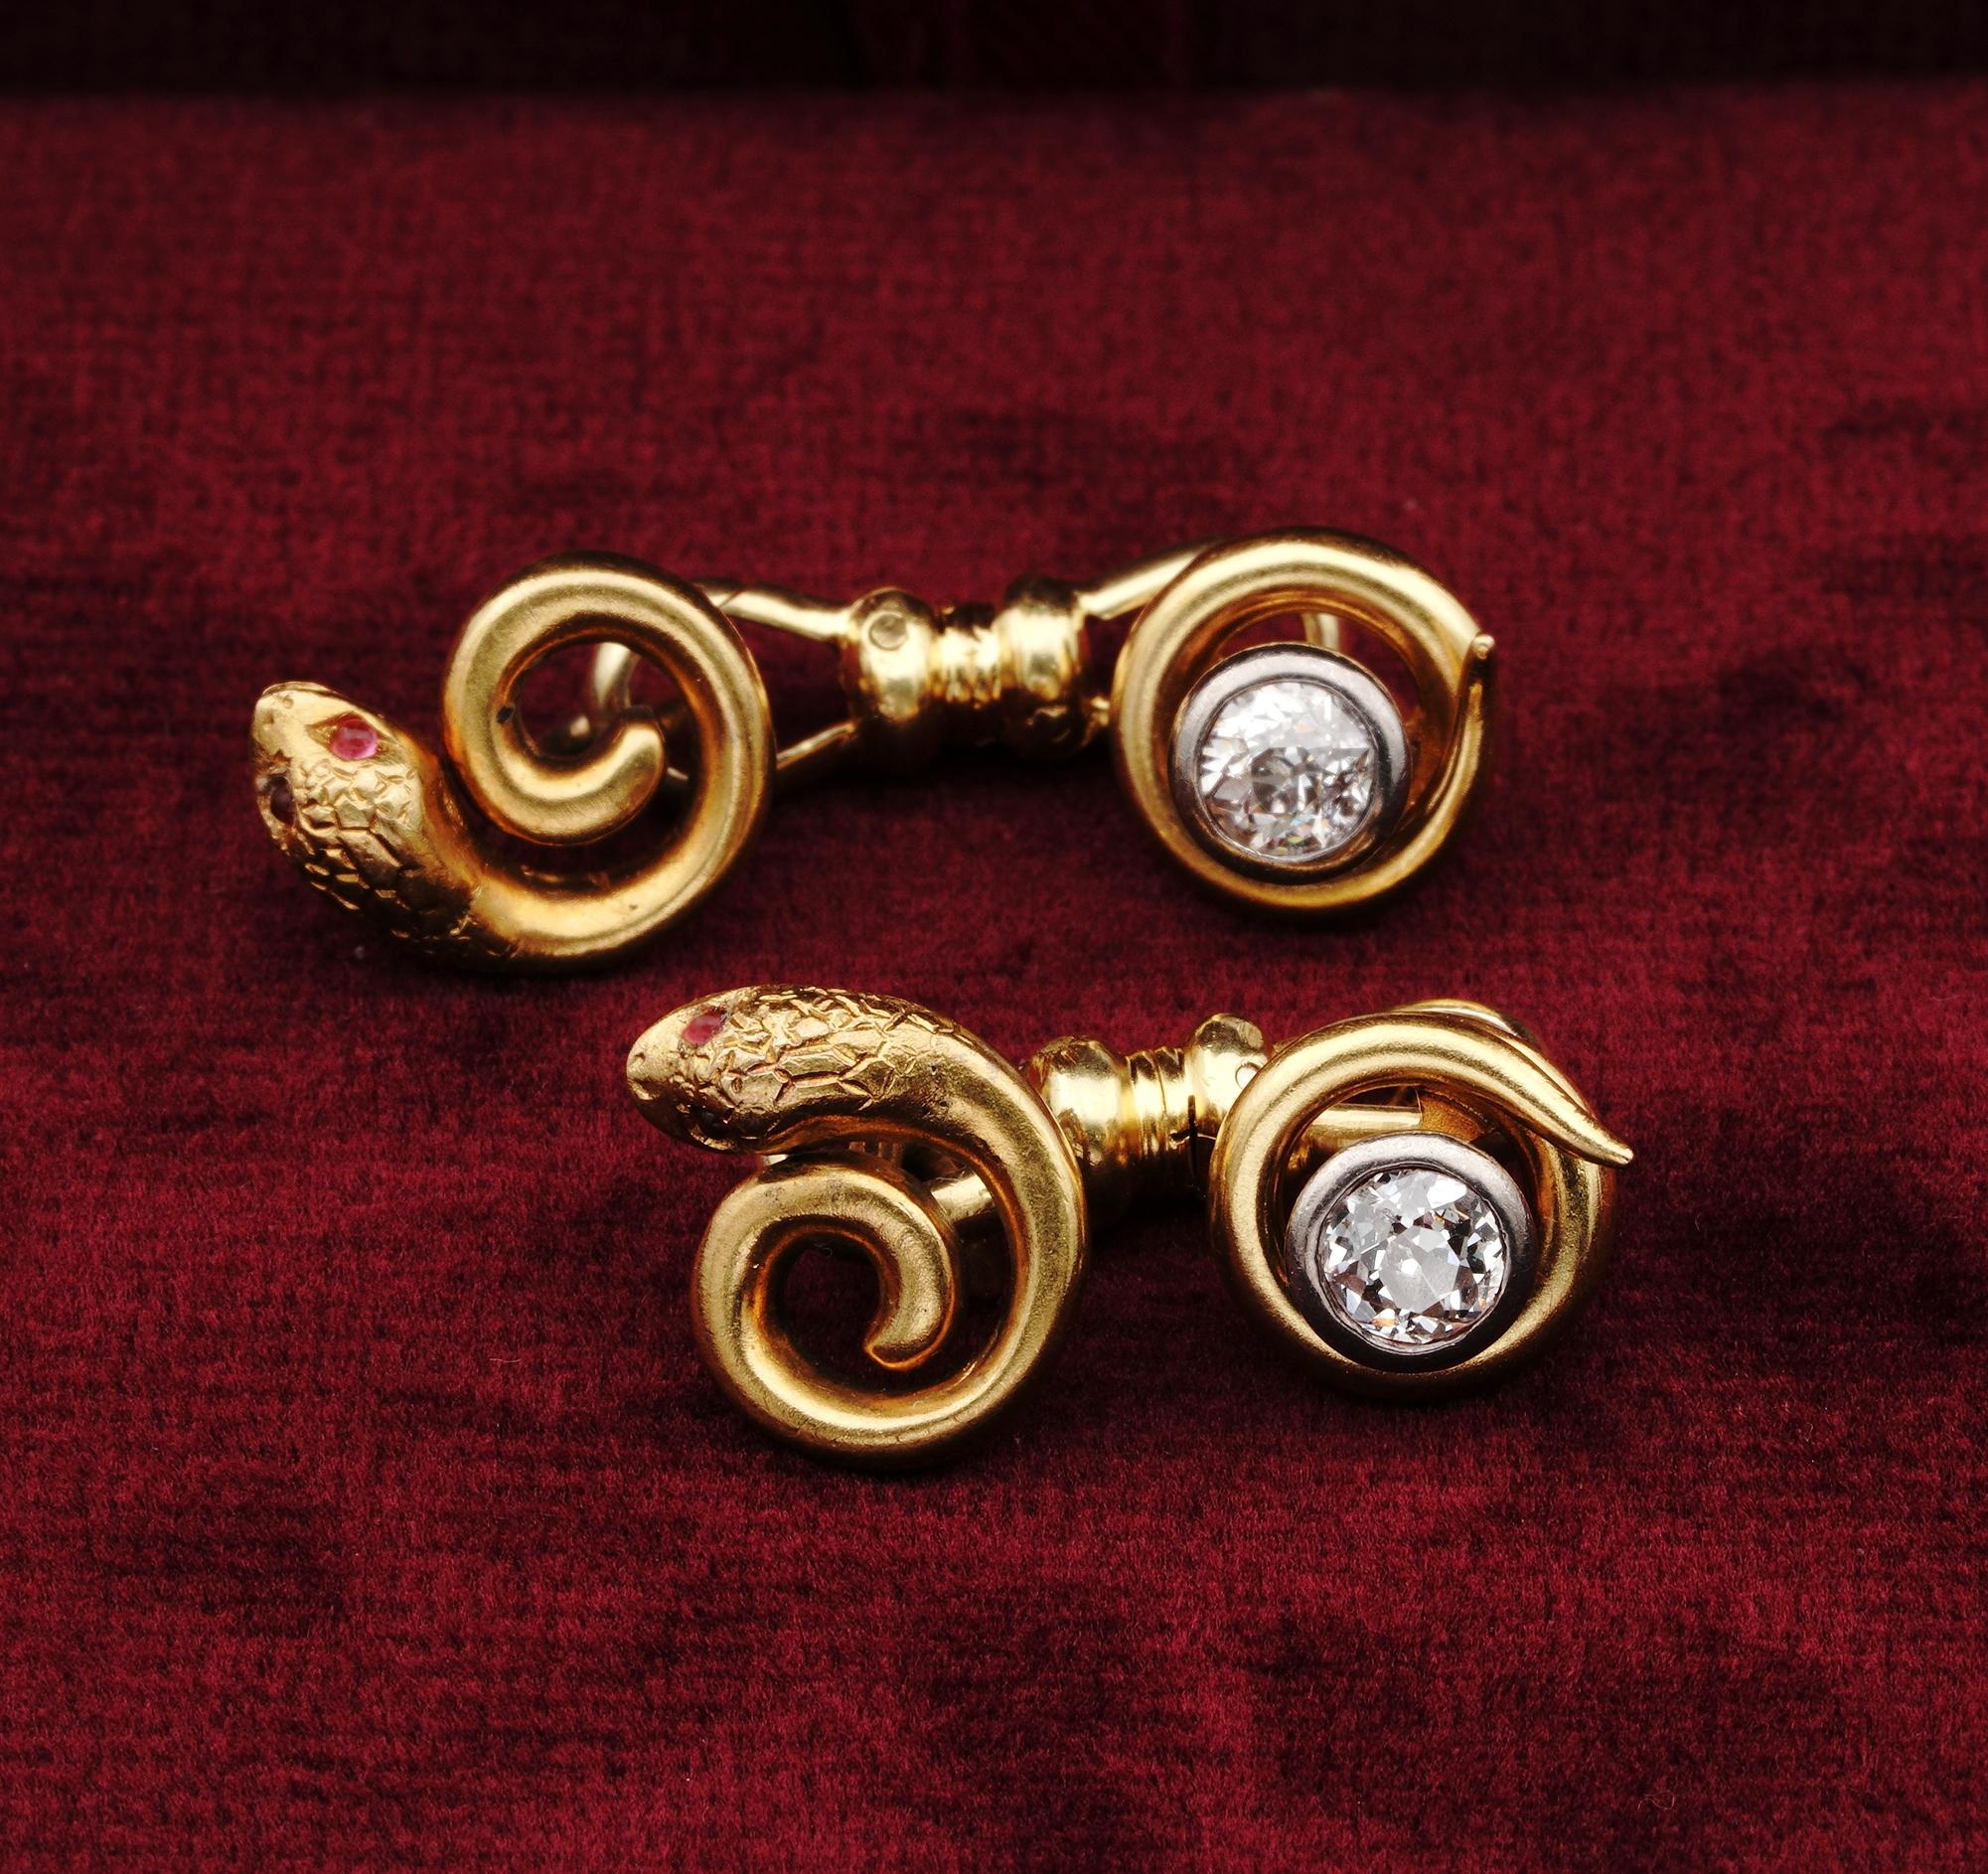  Rare Antique Cuff links

Rare and unusual authentic antique from the Victorian period Snake cuff links
An highly collectable pair to prize any collection or as a special gift to remark any event in life
Excellent examples such as these are hard to